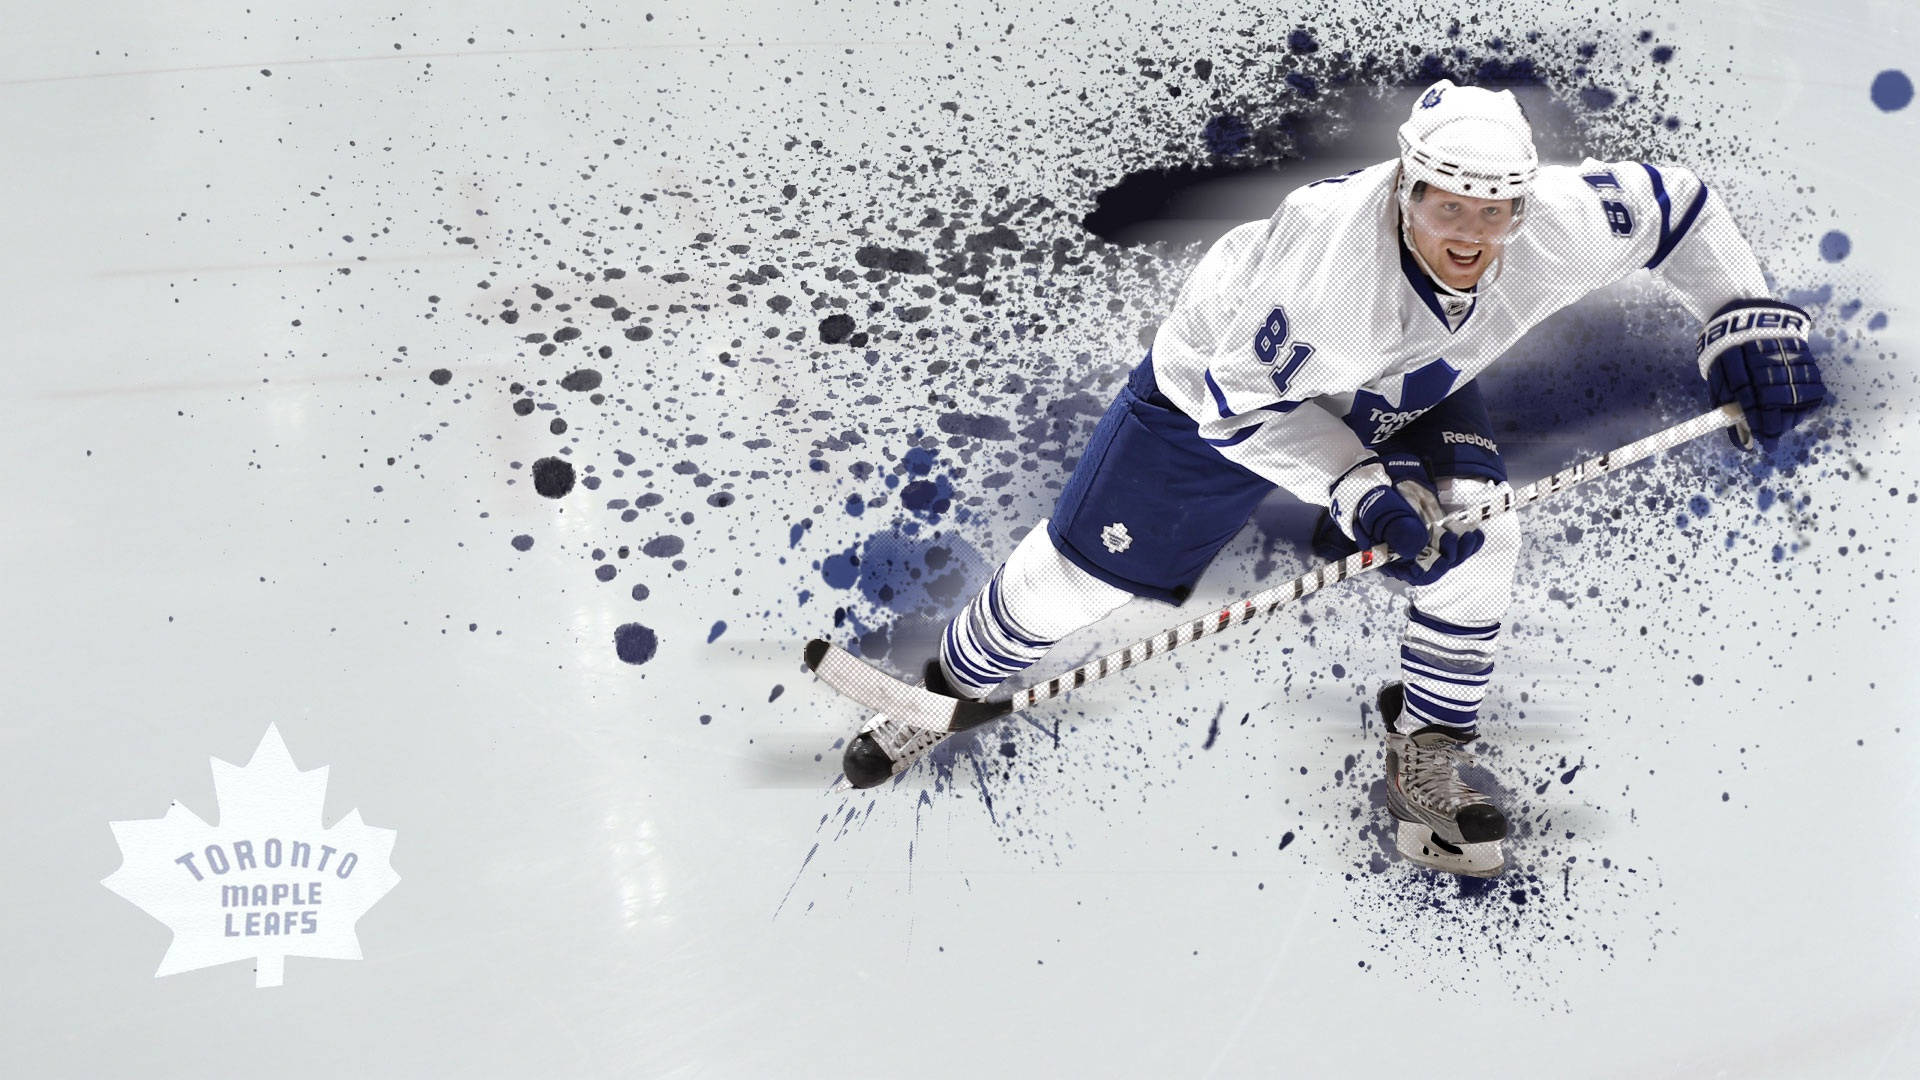 Valiant Hockey Player, Number 81, From Toronto Maple Leafs In Action. Background